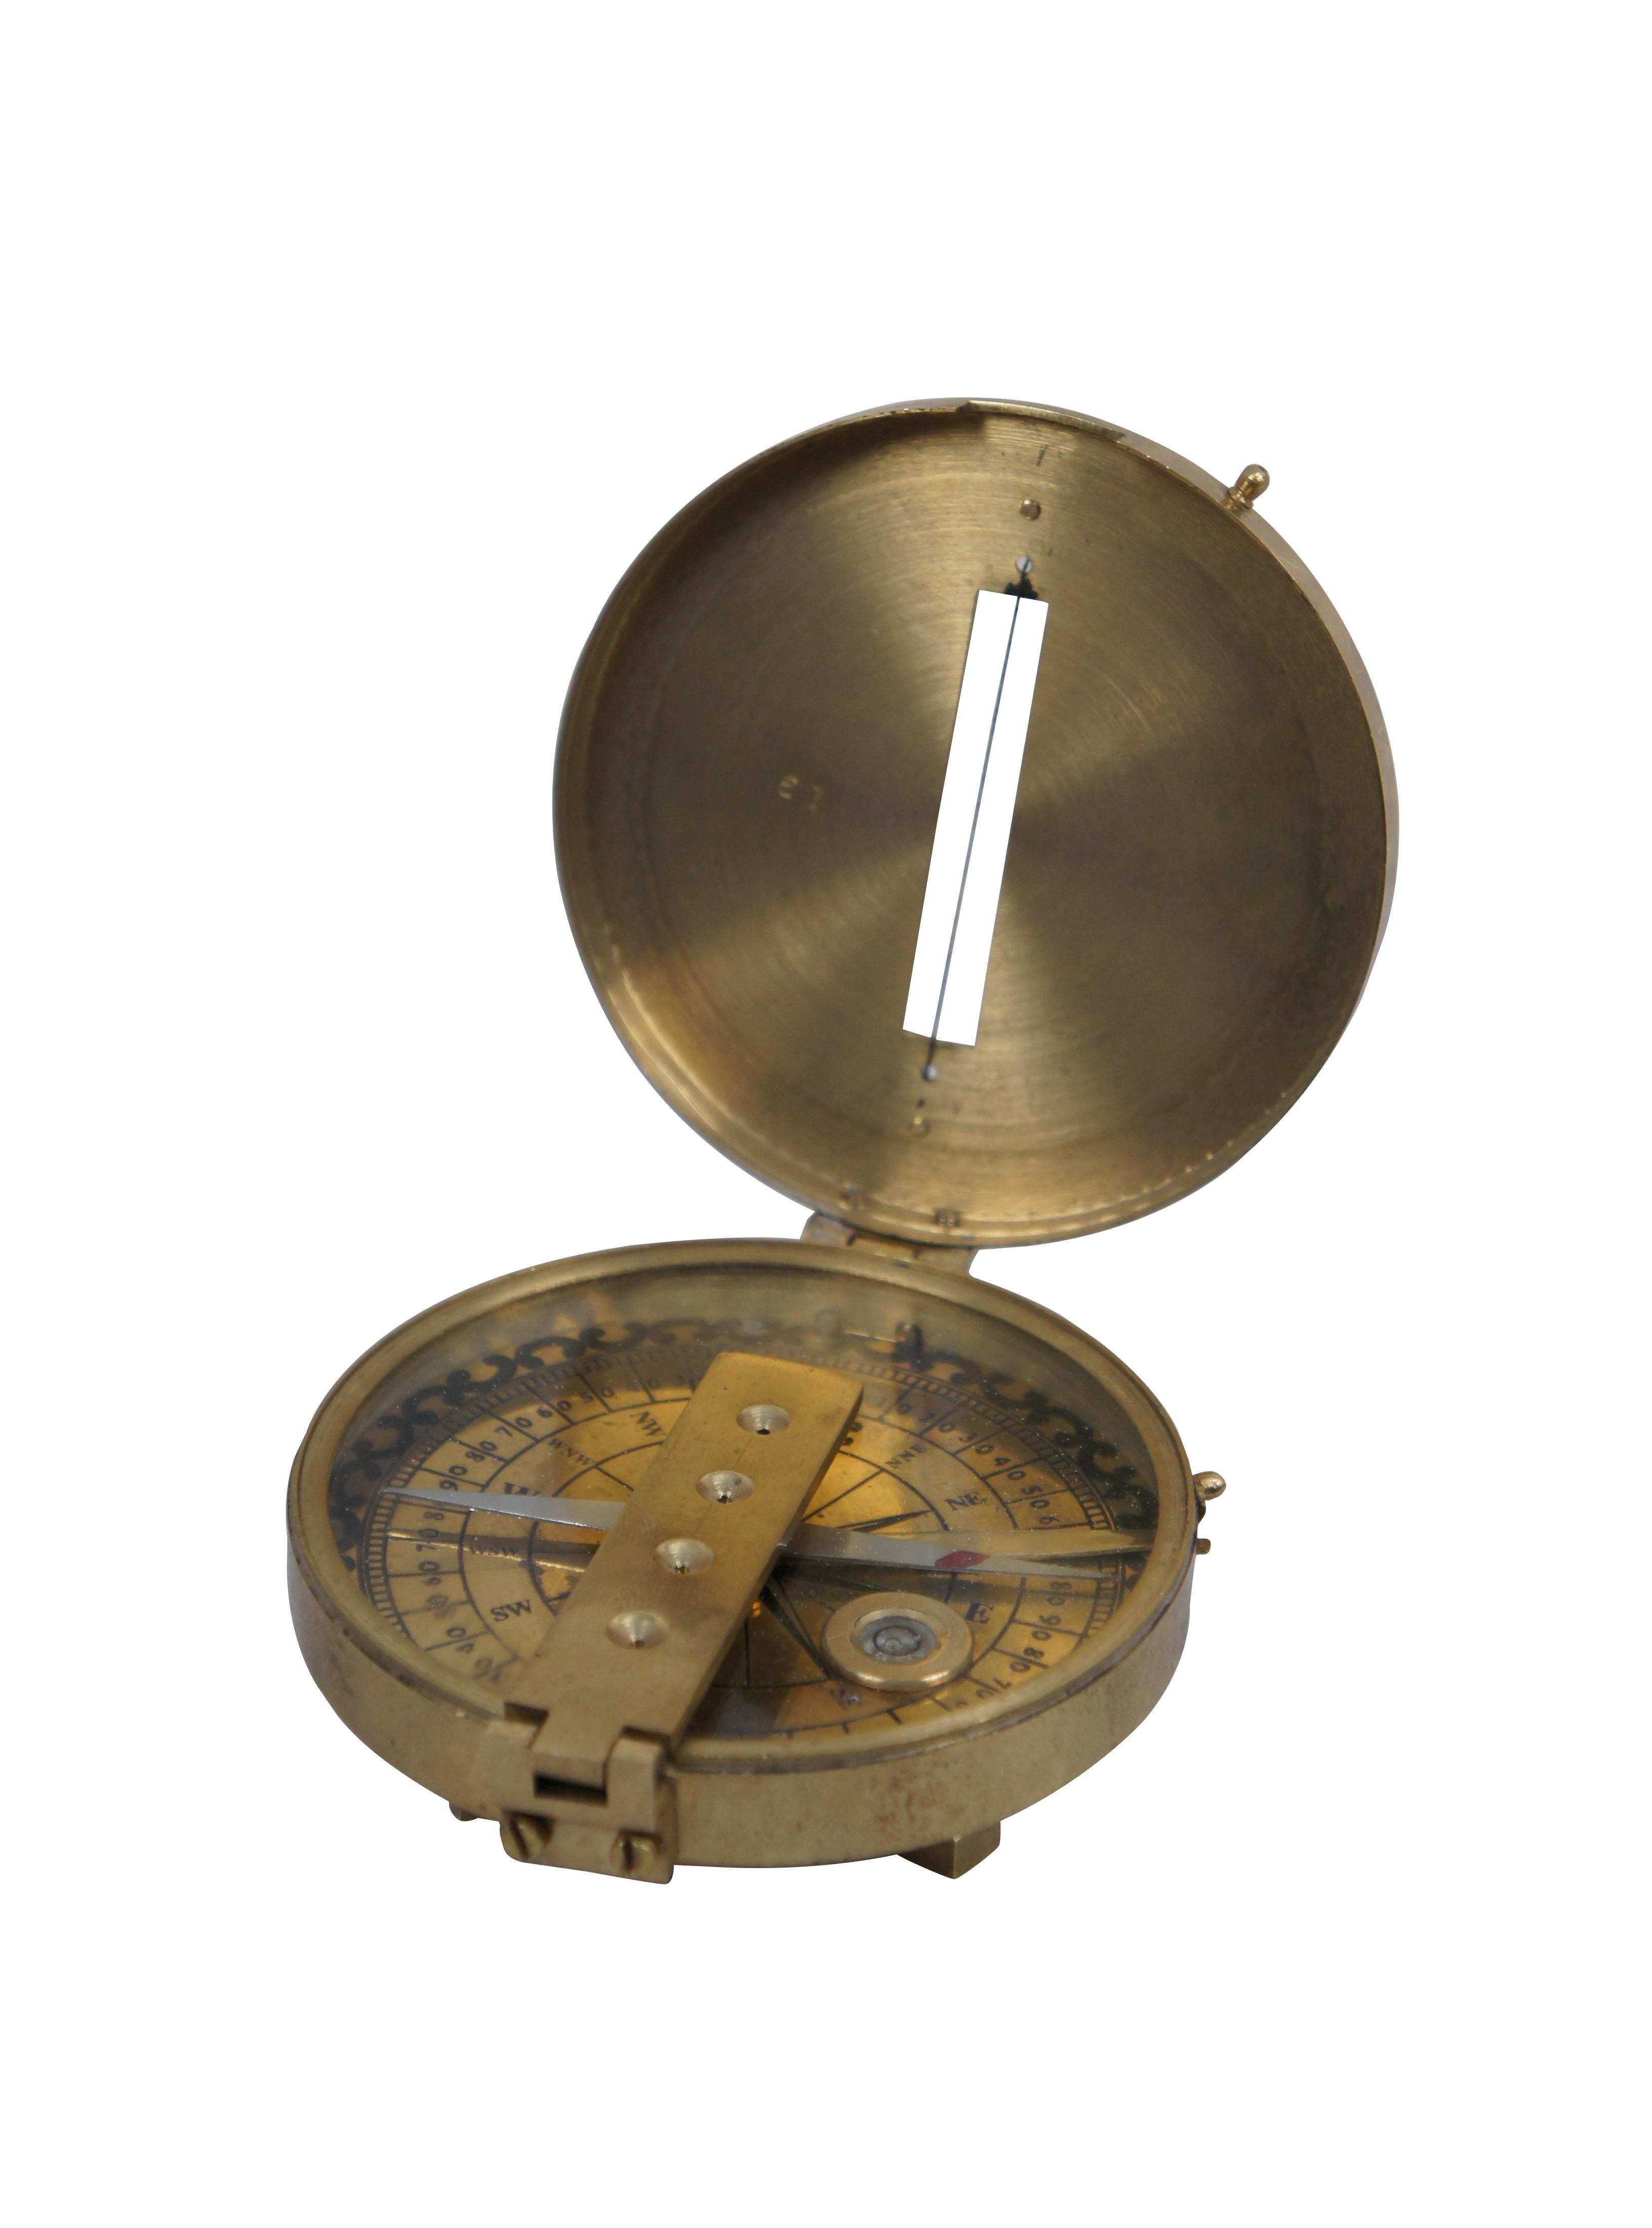 Antique Stanley London surveyors / nautical compass with brass case and face, leveling bubble, folding sightline, and pedestal base for attaching compass to a tripod.

